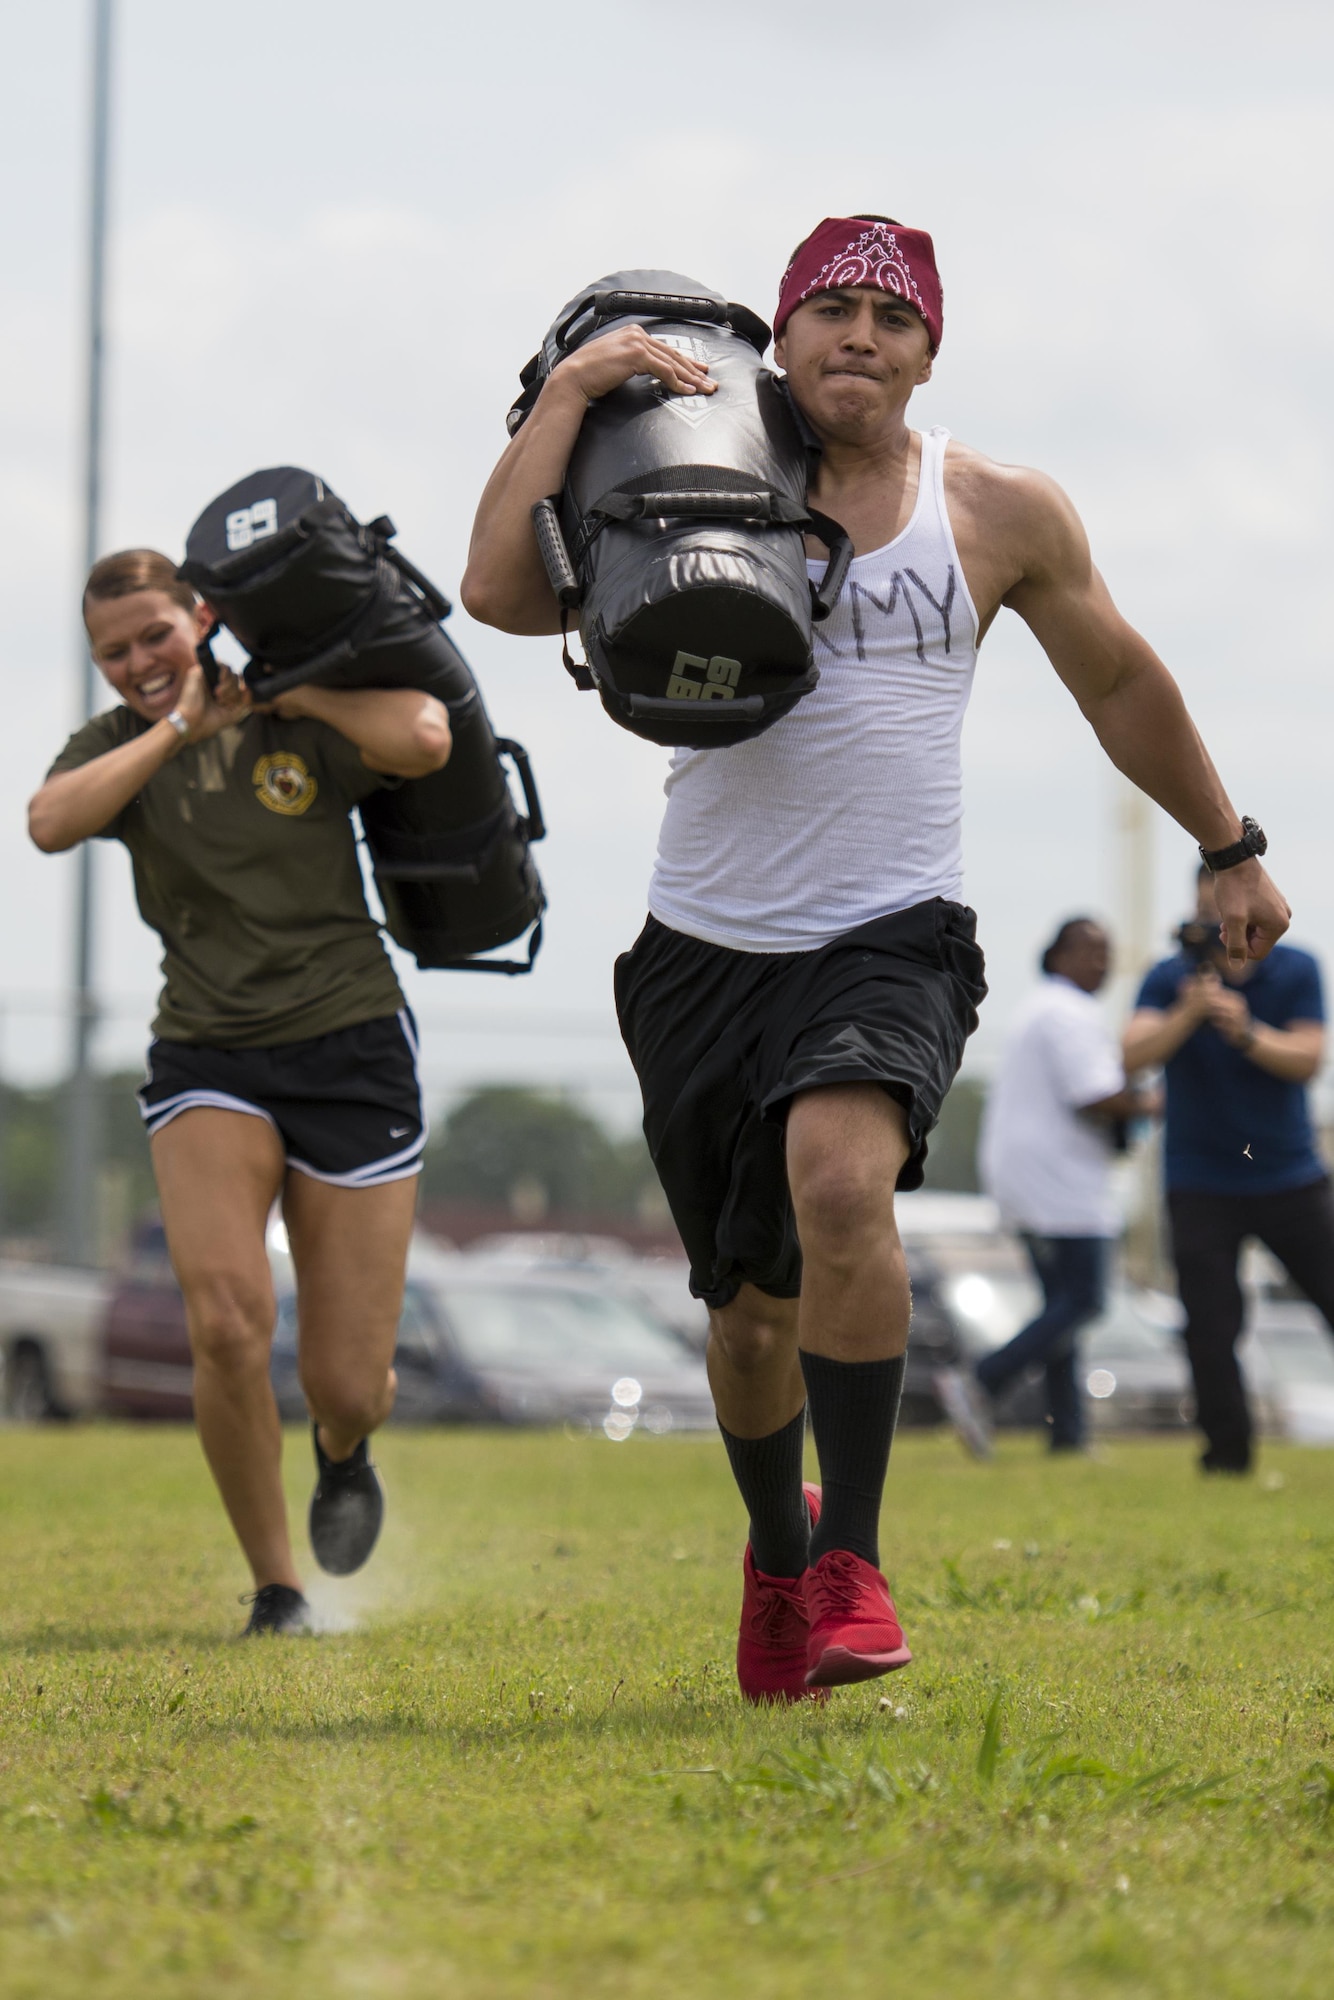 A member of the Army #1 team races to the finish line carrying a 60 pound bag during the “Survivor’s Challenge” April 13, 2017, at Joint Base San Antonio-Randolph.  Survivor’s Challenge is a JBSA competition where teams compete in mental and physical challenges to help raise awareness and prevent sexual assault within the military and federal service.  (U.S. Air Force photo by Sean M. Worrell)